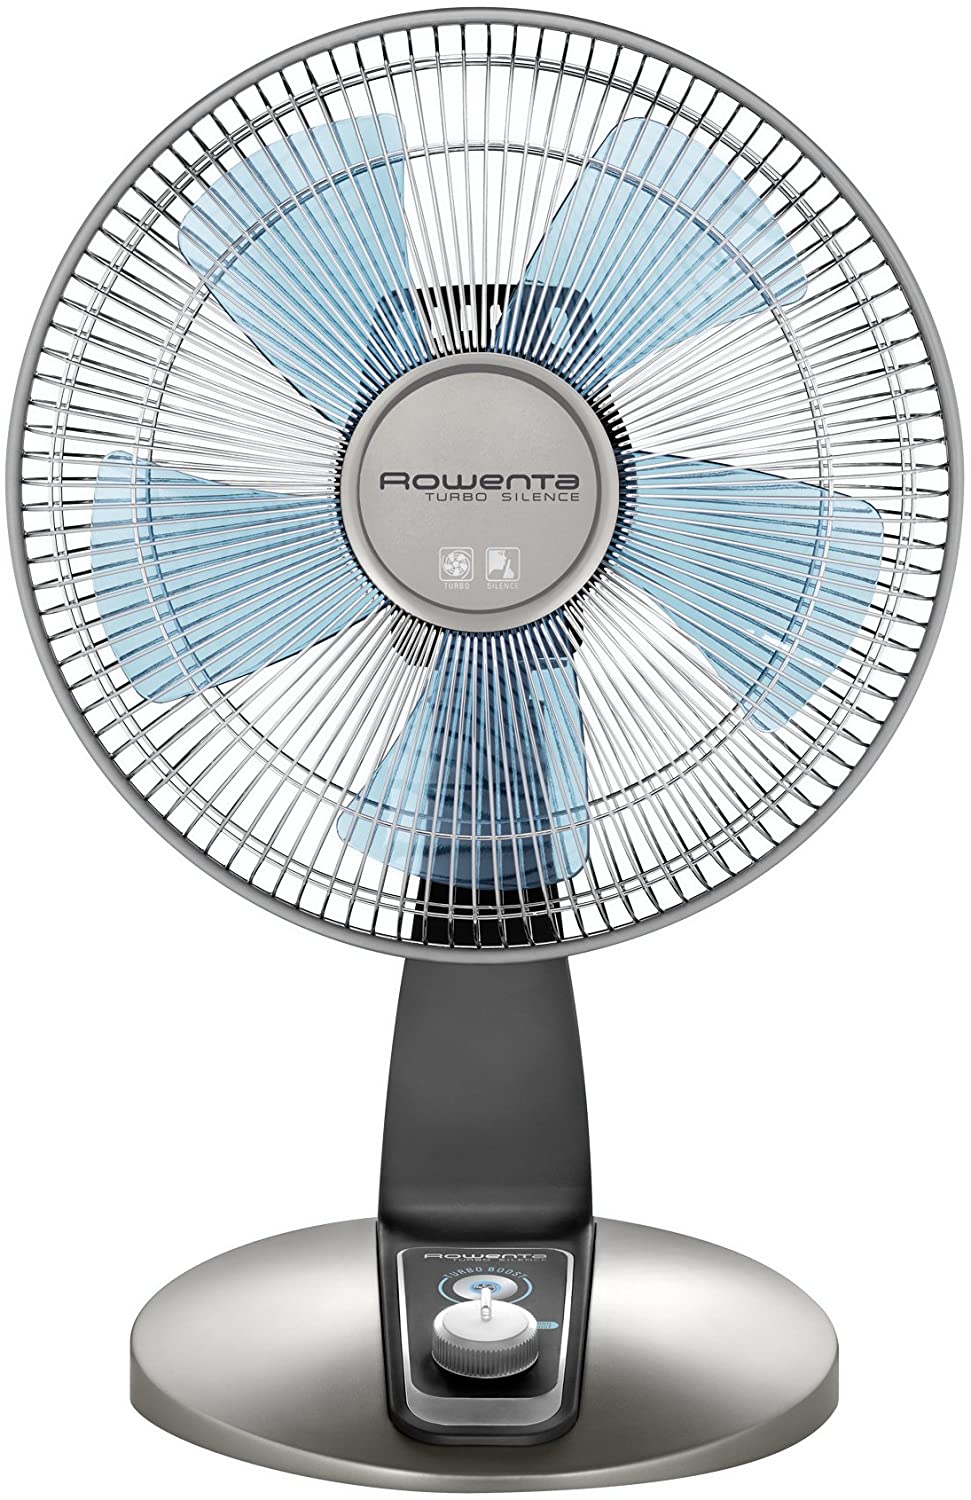 Rowenta VU2531 Turbo Silence Oscillating 12-Inch Table Fan Powerful and Quiet, 4-Speed, Bronze